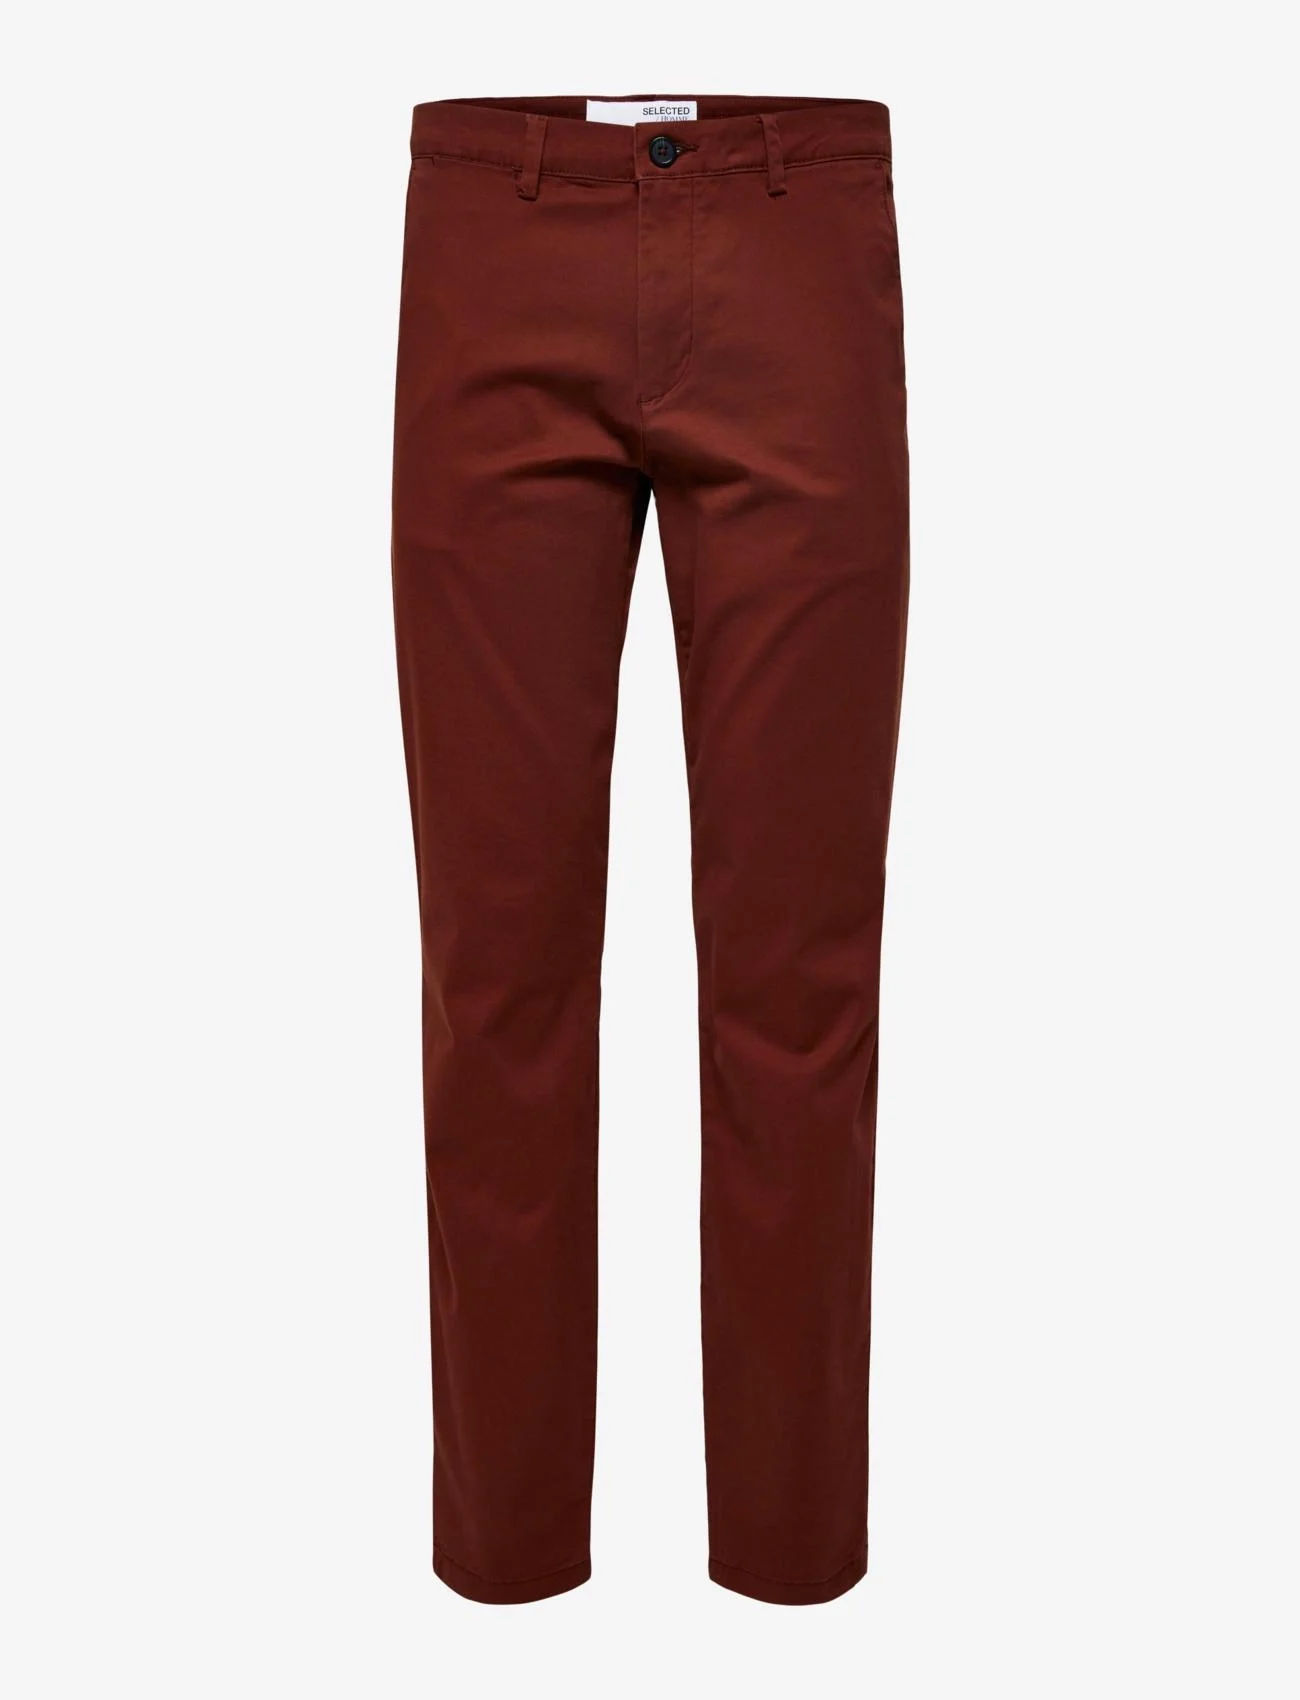 Selected Homme - SLH175-SLIM NEW MILES FLEX PANT NOOS - chinos - cherry mahogany - 0